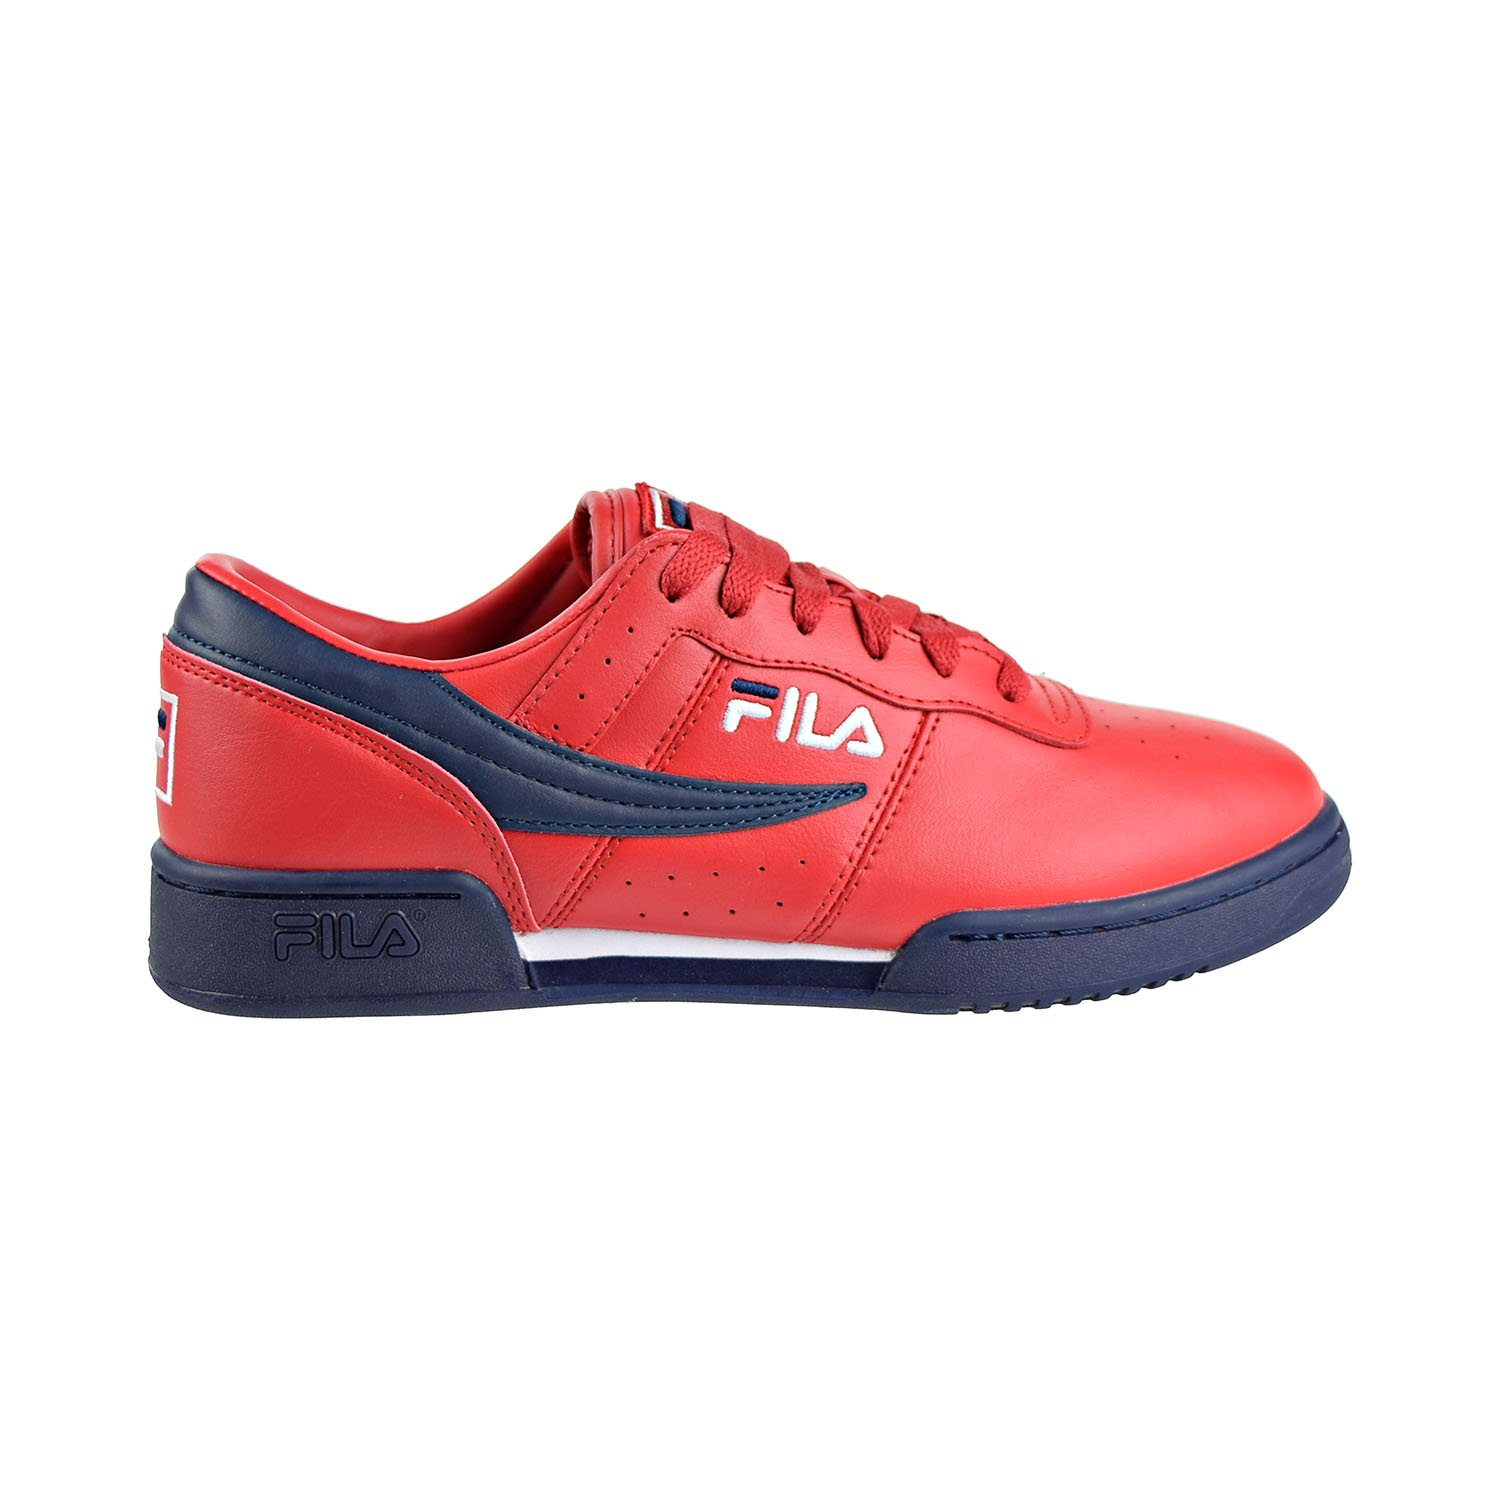 fila shoes in red